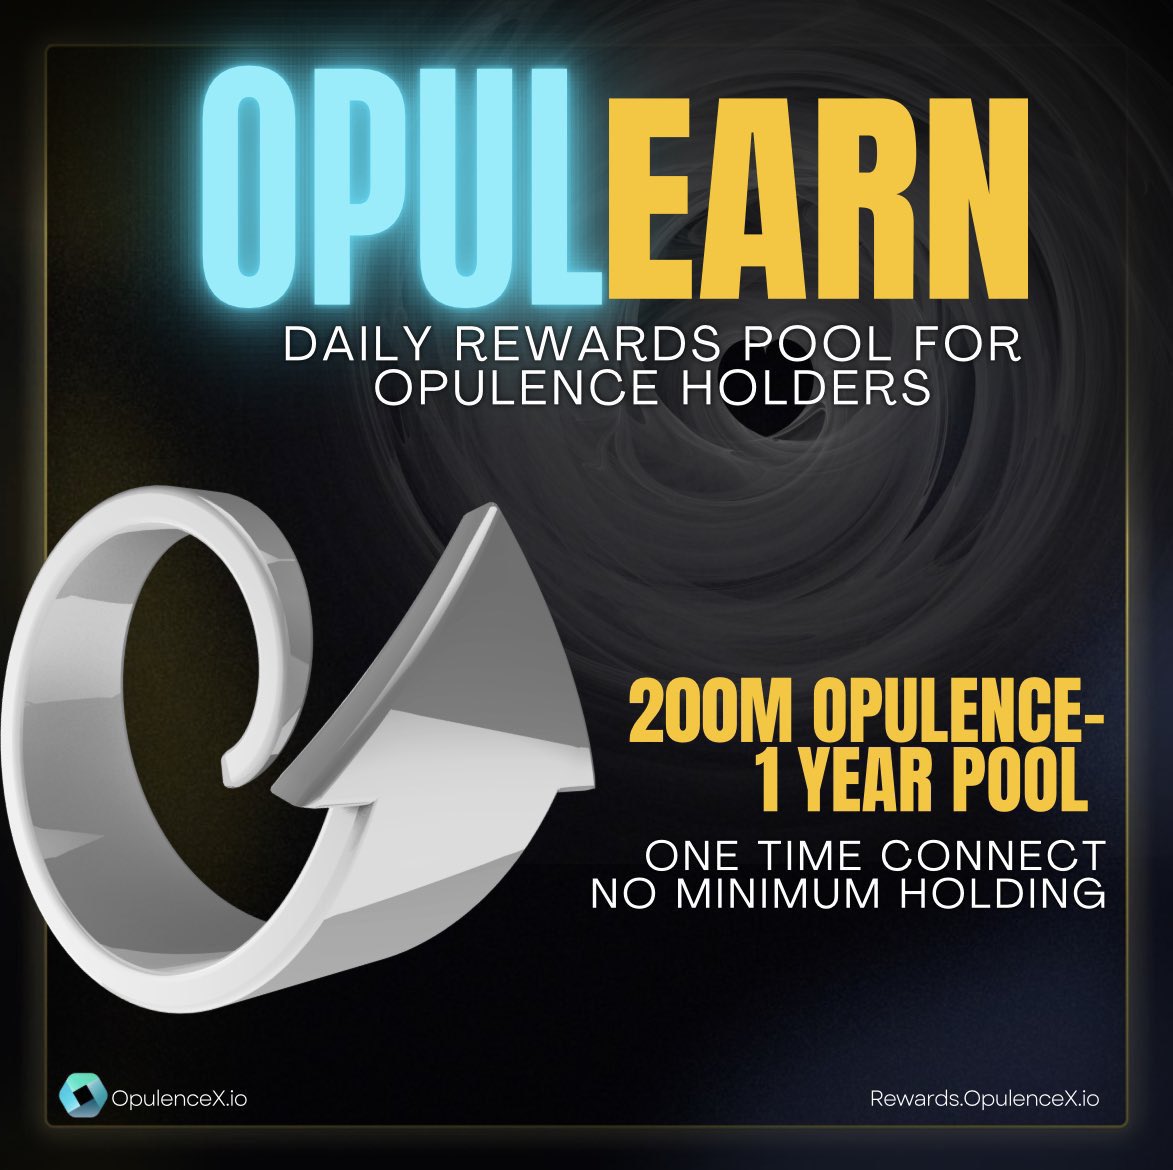 🚨#Opularians New Day, New Rewards!  
Connect your wallet to #OpulEarn!    
and receive a daily drop of $Opulence 
Just connect your wallet to get your $Opulence daily
Low fee 1-time registration cost. 
Connect here reward.opulencex.io 
#OPXMarketplace #OpulenceX
📷